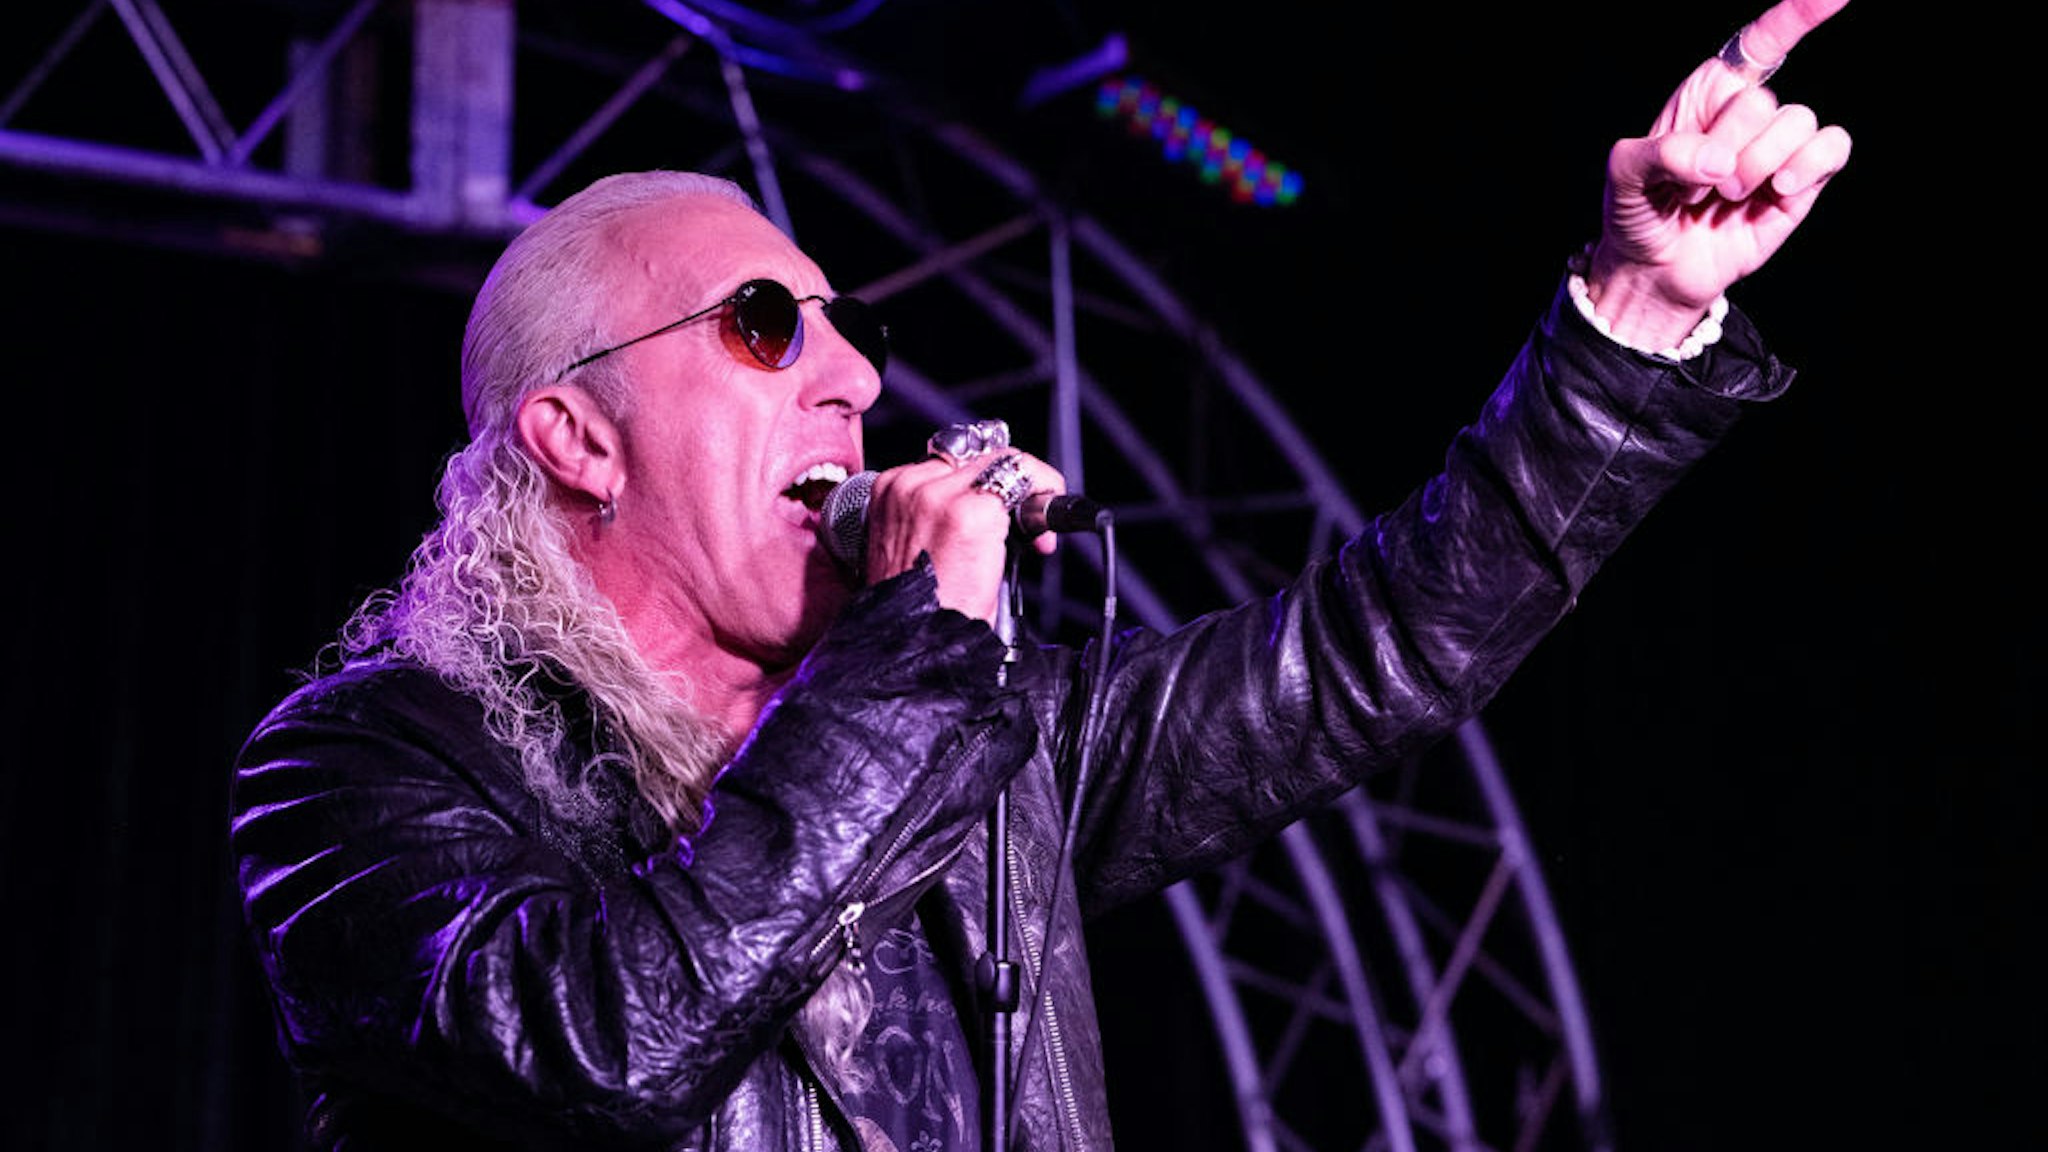 AGOURA HILLS, CALIFORNIA - APRIL 05: Singer Dee Snider, former singer of Twisted Sister, performs onstage during a Concert for Ukraine benefiting Save the Children's "Children's Emergency Fund" at BL Dancehall and Saloon on April 05, 2022 in Agoura Hills, California. (Photo by Scott Dudelson/Getty Images)